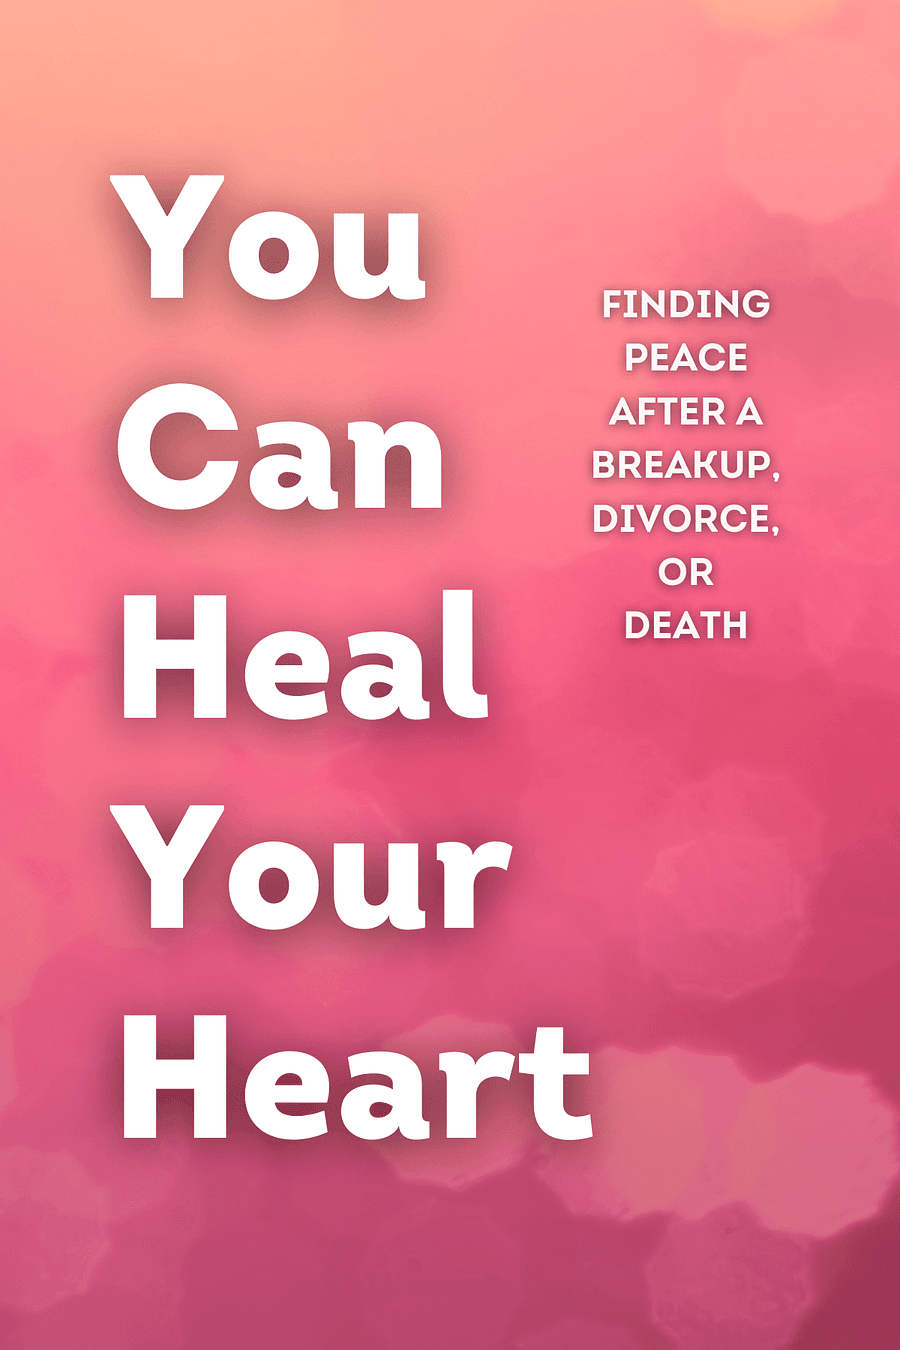 You Can Heal Your Heart by Louise Hay, David Kessler - Book Summary